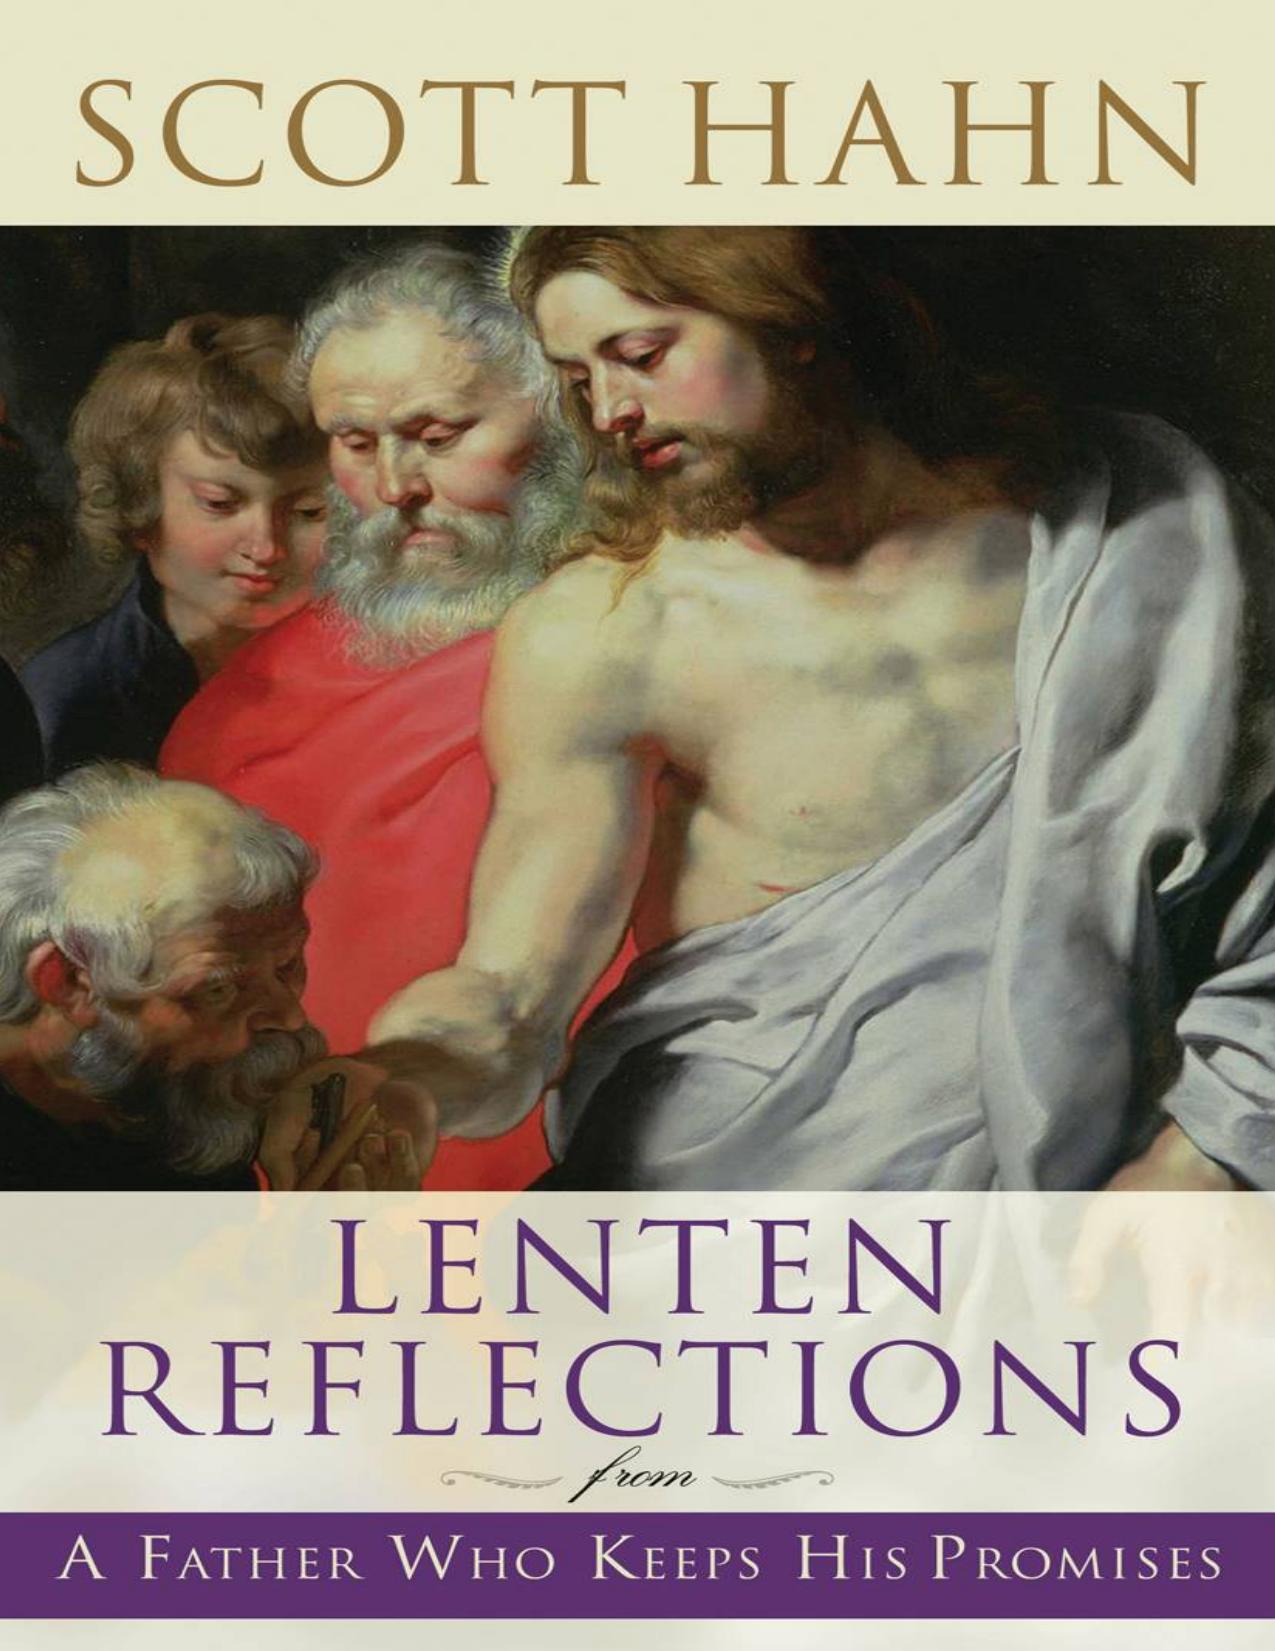 Lenten Reflections From a Father Who Keeps His Promises by Scott Hahn